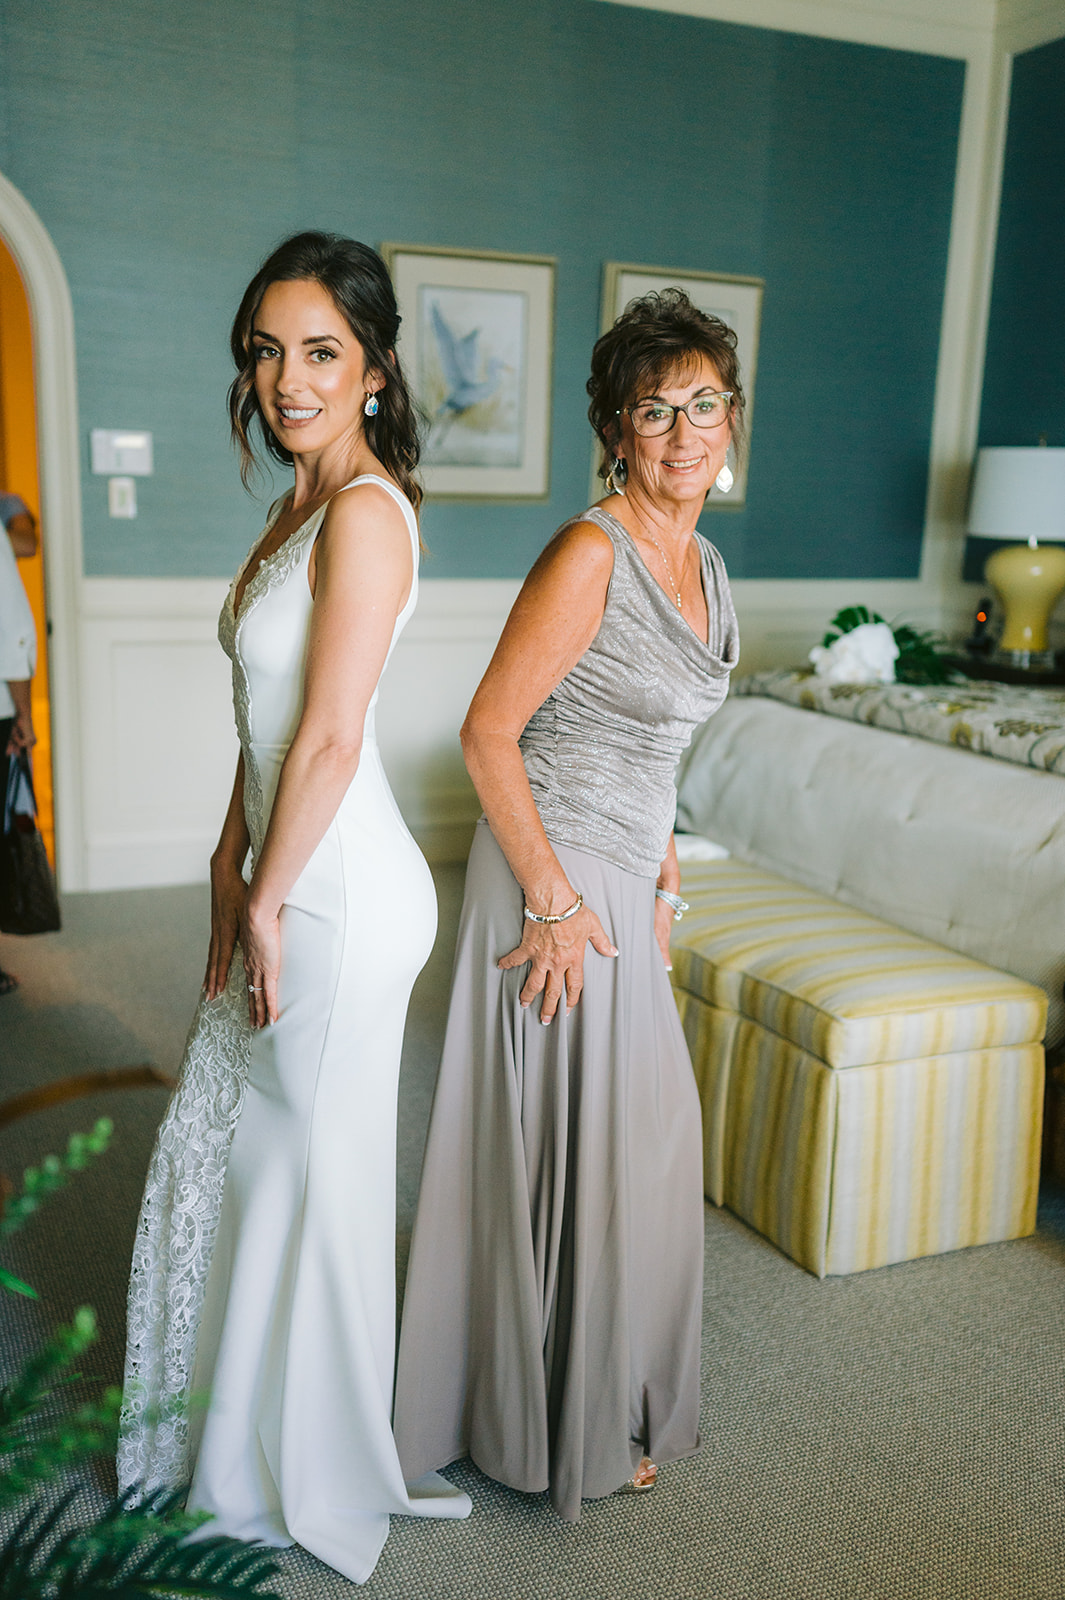 Candid moment: Naples FL wedding photographer captures the bride and her bridesmaids
